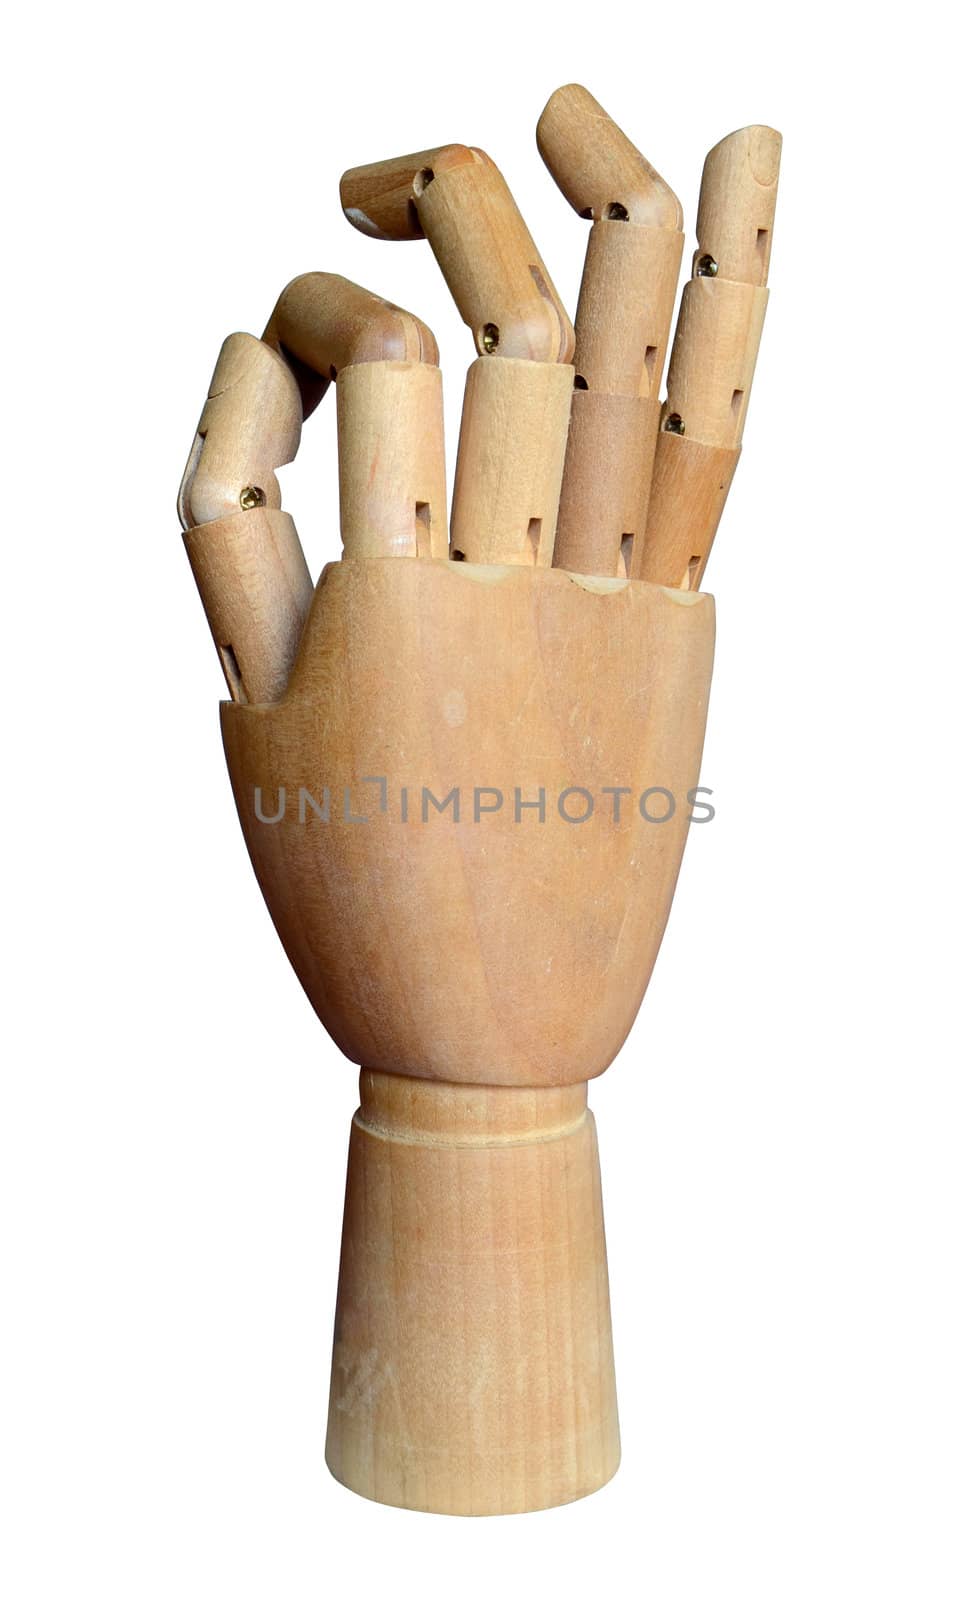 An Isolation Of An Artist's Wooden Jointed Hand Model